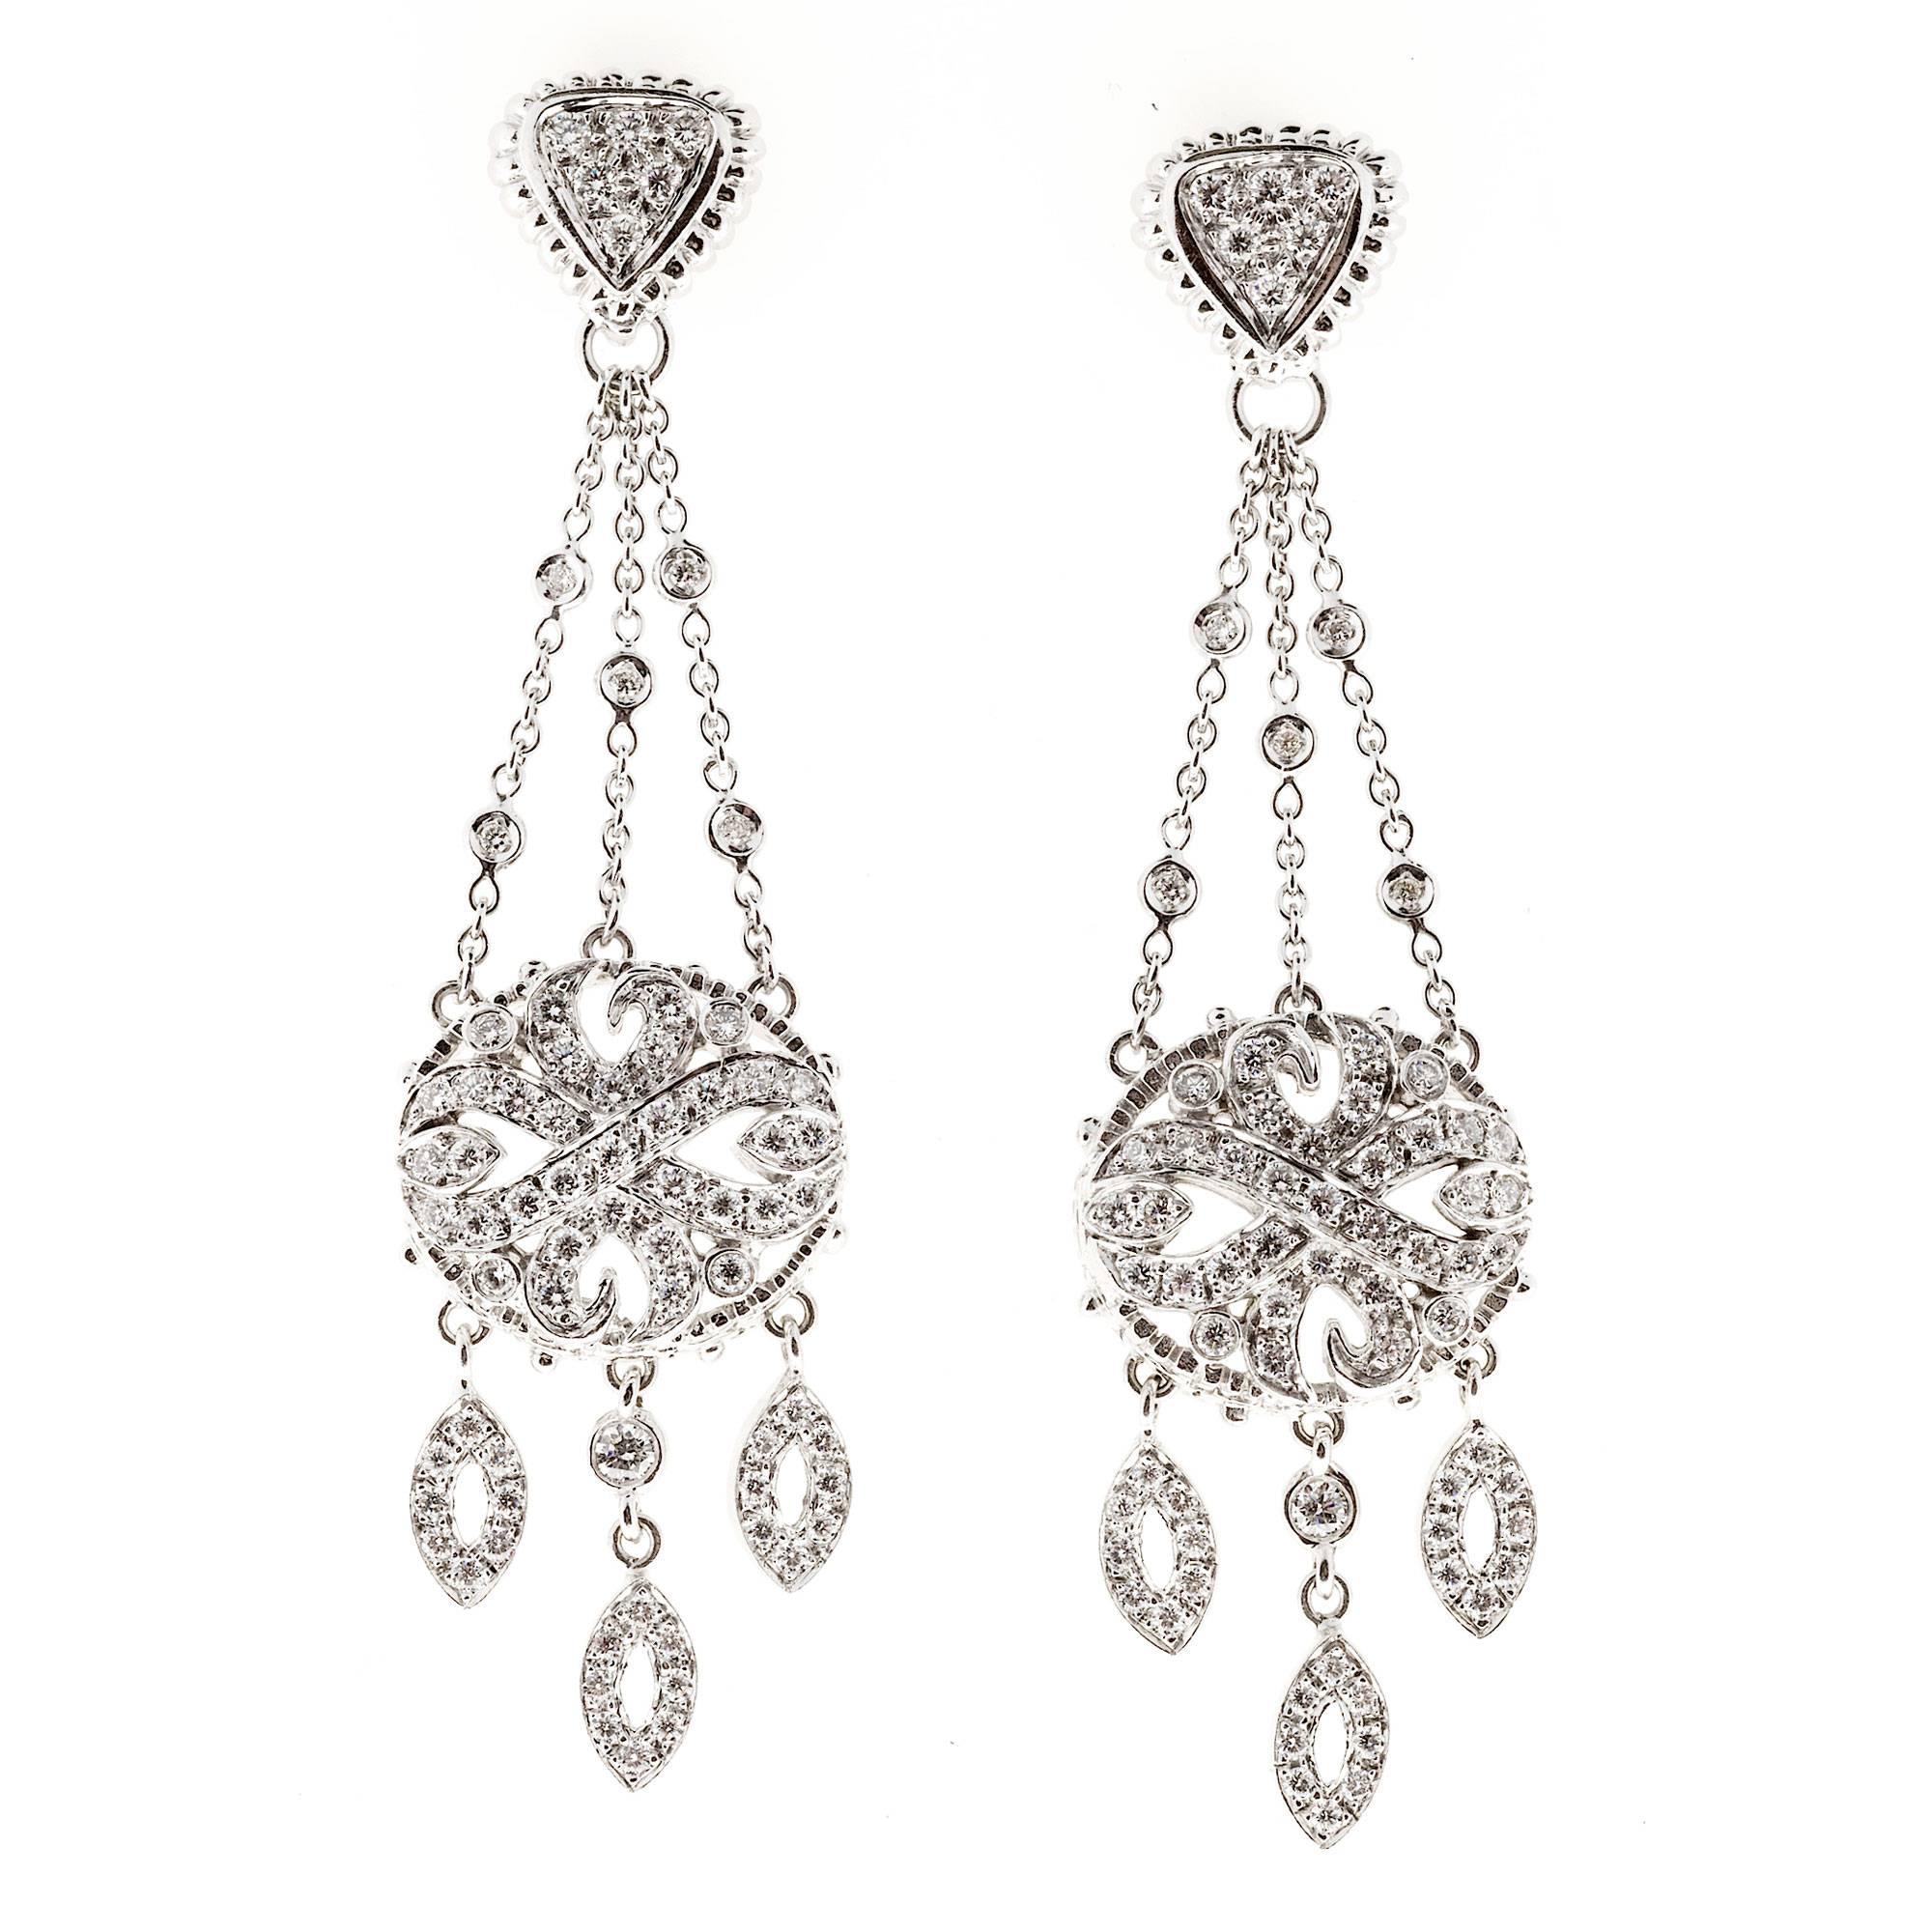 Authentic dramatic original Doris Panos 18k white gold Chandelier earrings with a beautiful 3 dimensional design. Excellent condition. Looks great on the ear.

142 round full cut diamonds, approx. total weight 2.00cts, F to G, VS, bright and